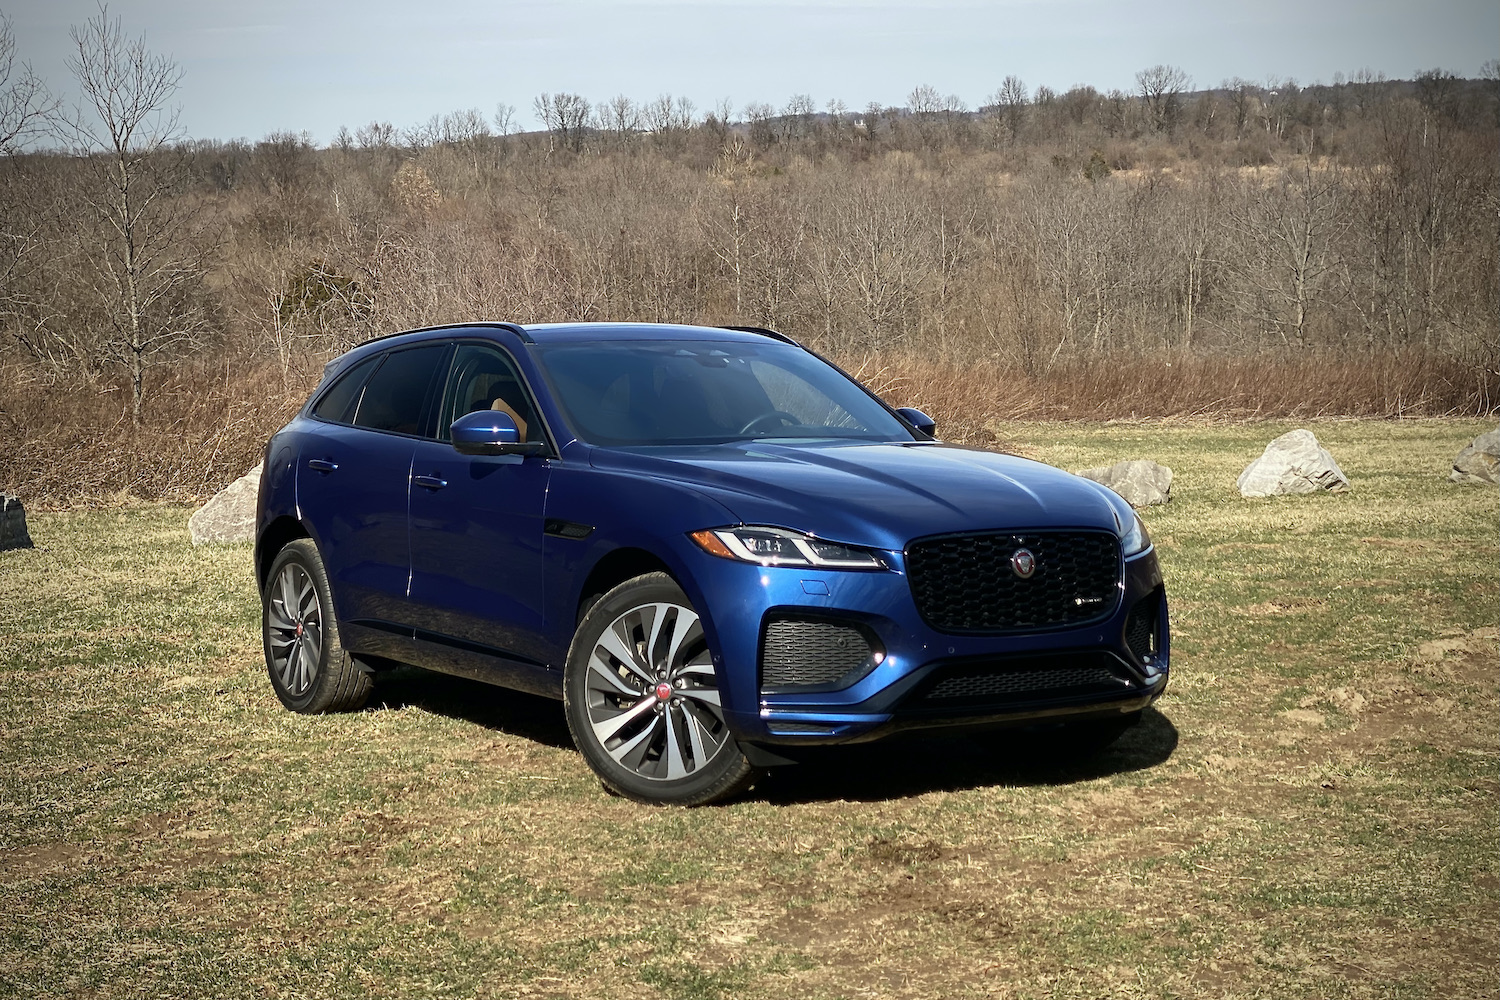 2022 Jaguar F-Pace R Dynamic S front end up from passenger's side in a grassy field.